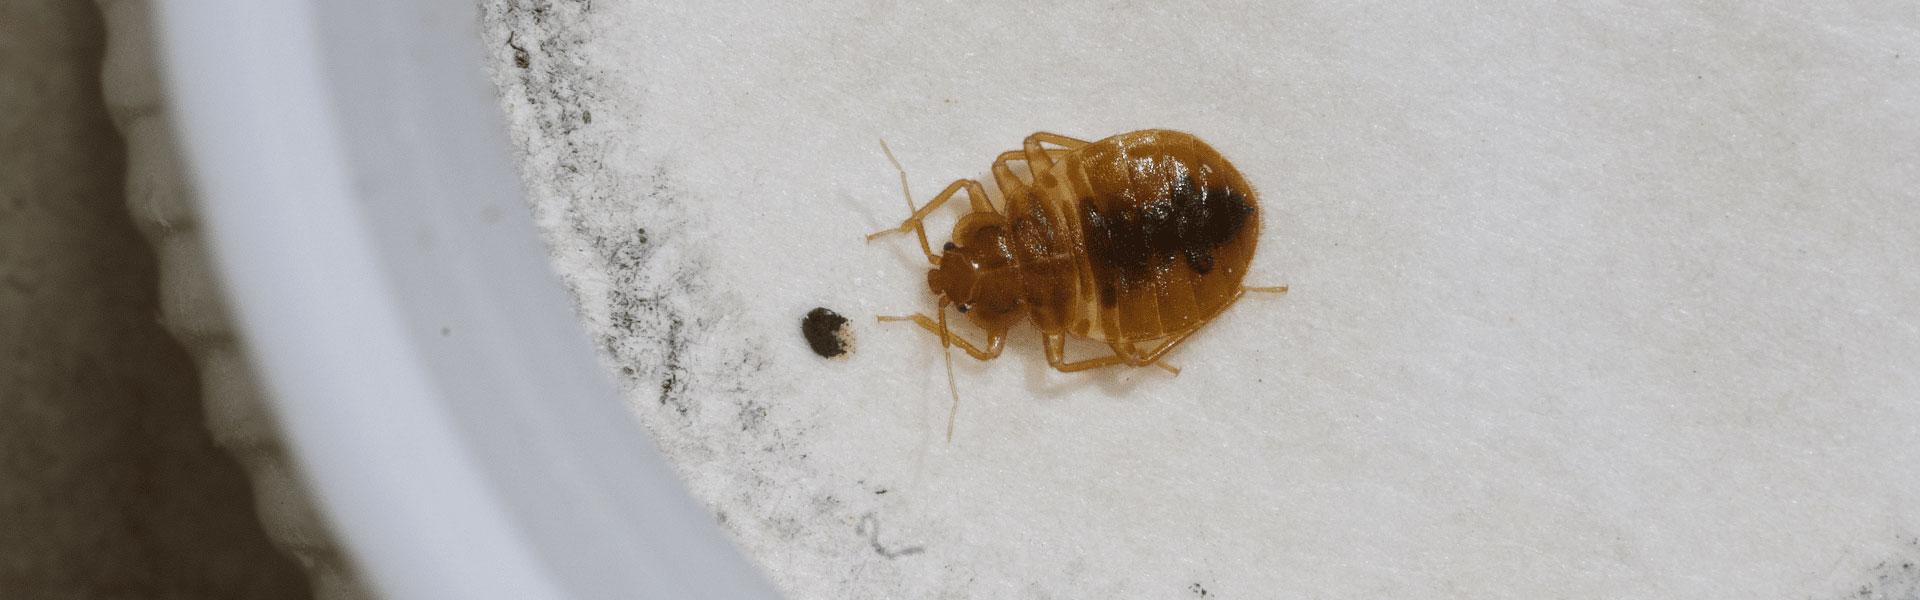 bed bug and fecal matter